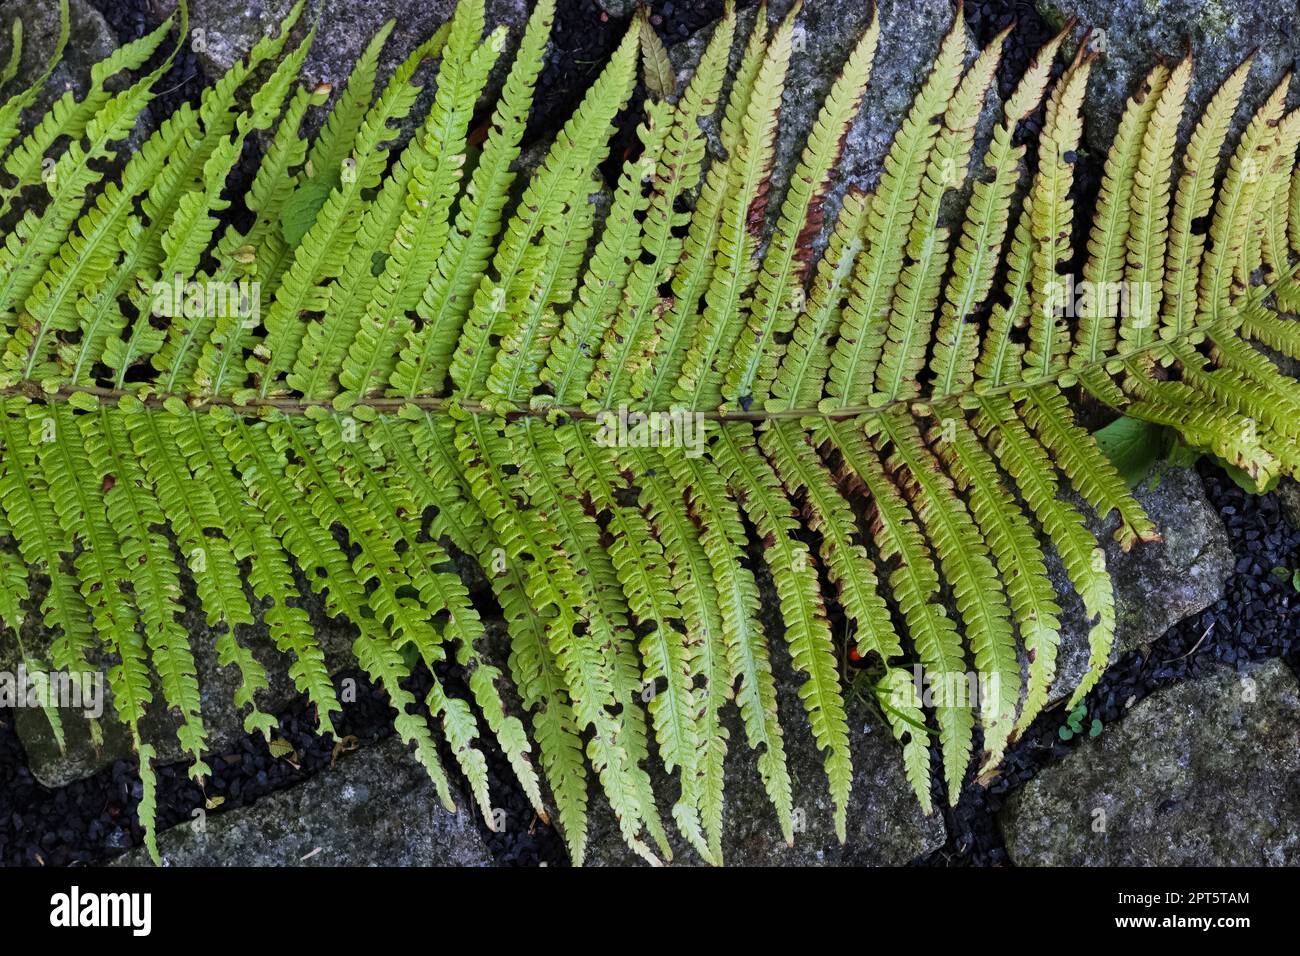 Detailed view on green fern leaves on a forest ground Stock Photo